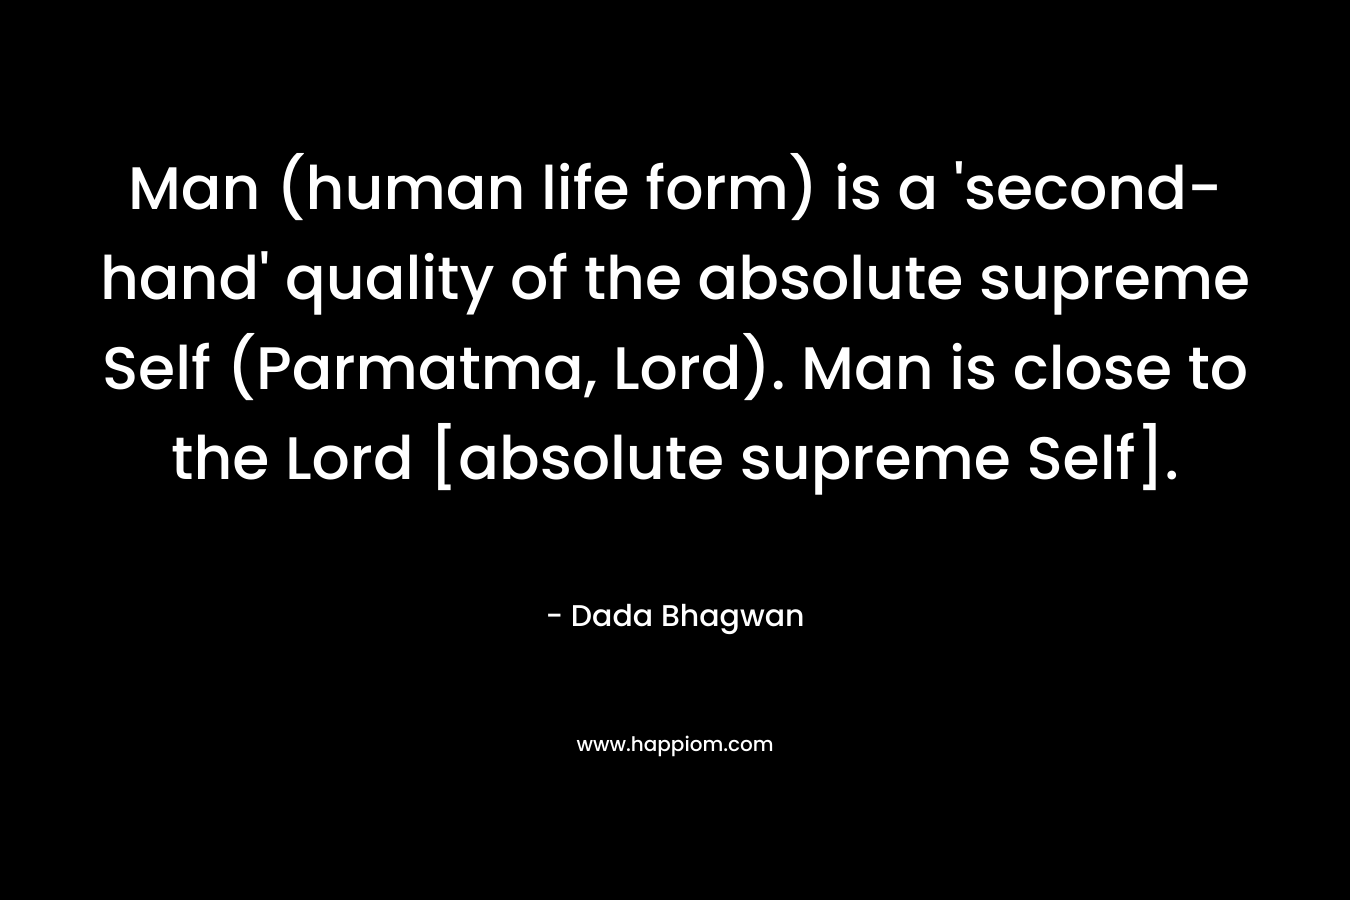 Man (human life form) is a ‘second-hand’ quality of the absolute supreme Self (Parmatma, Lord). Man is close to the Lord [absolute supreme Self]. – Dada Bhagwan